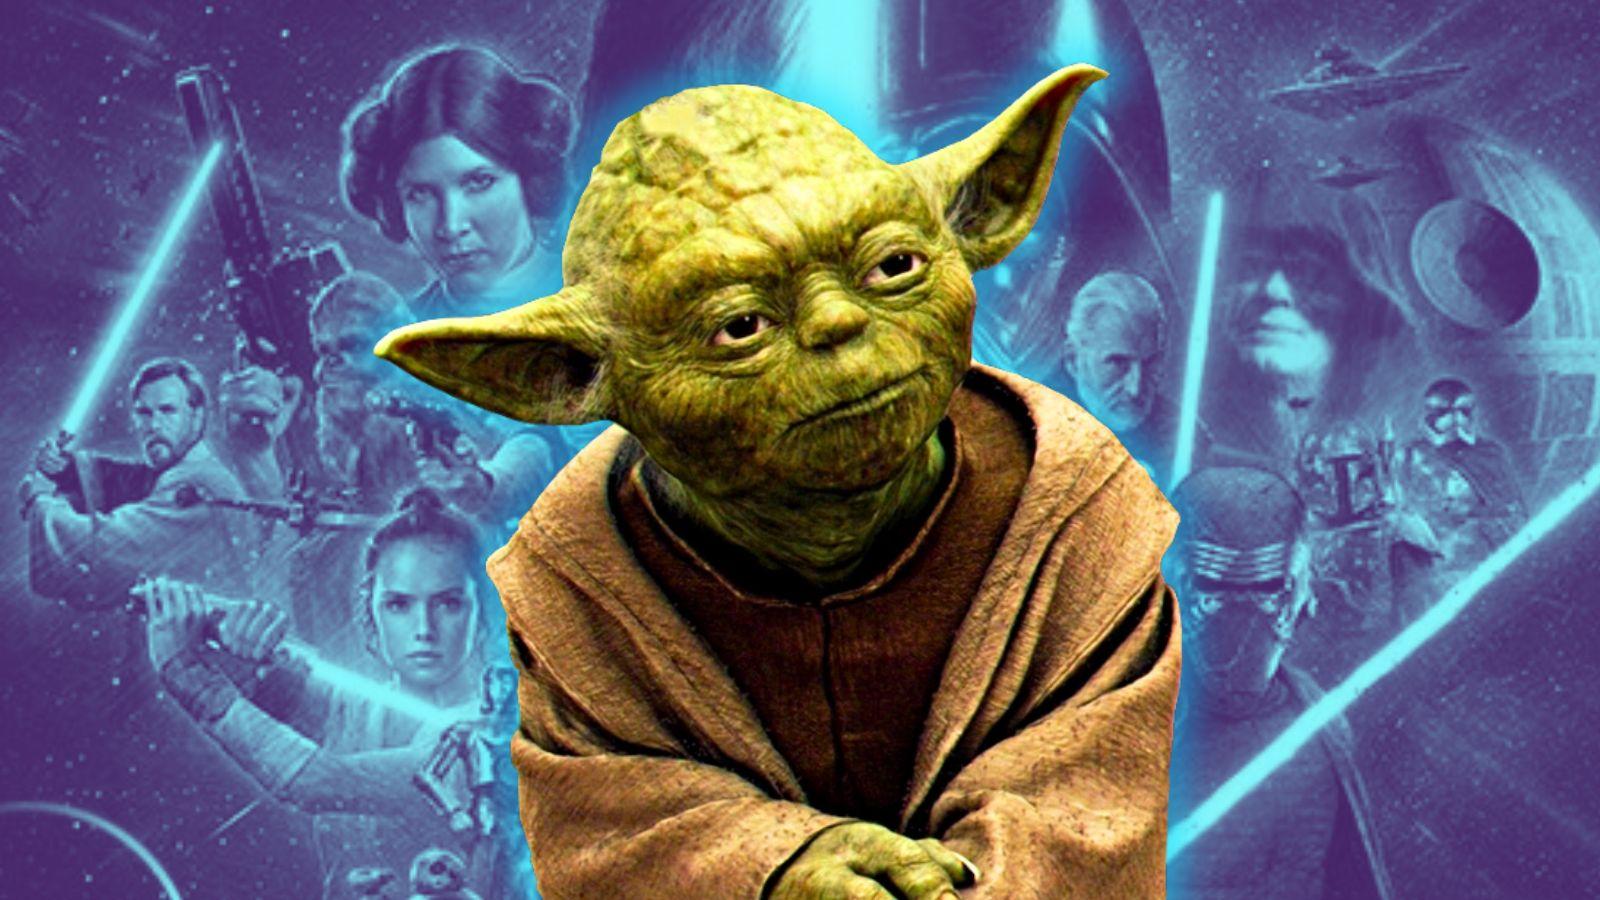 Yoda in front of a Star Wars poster.